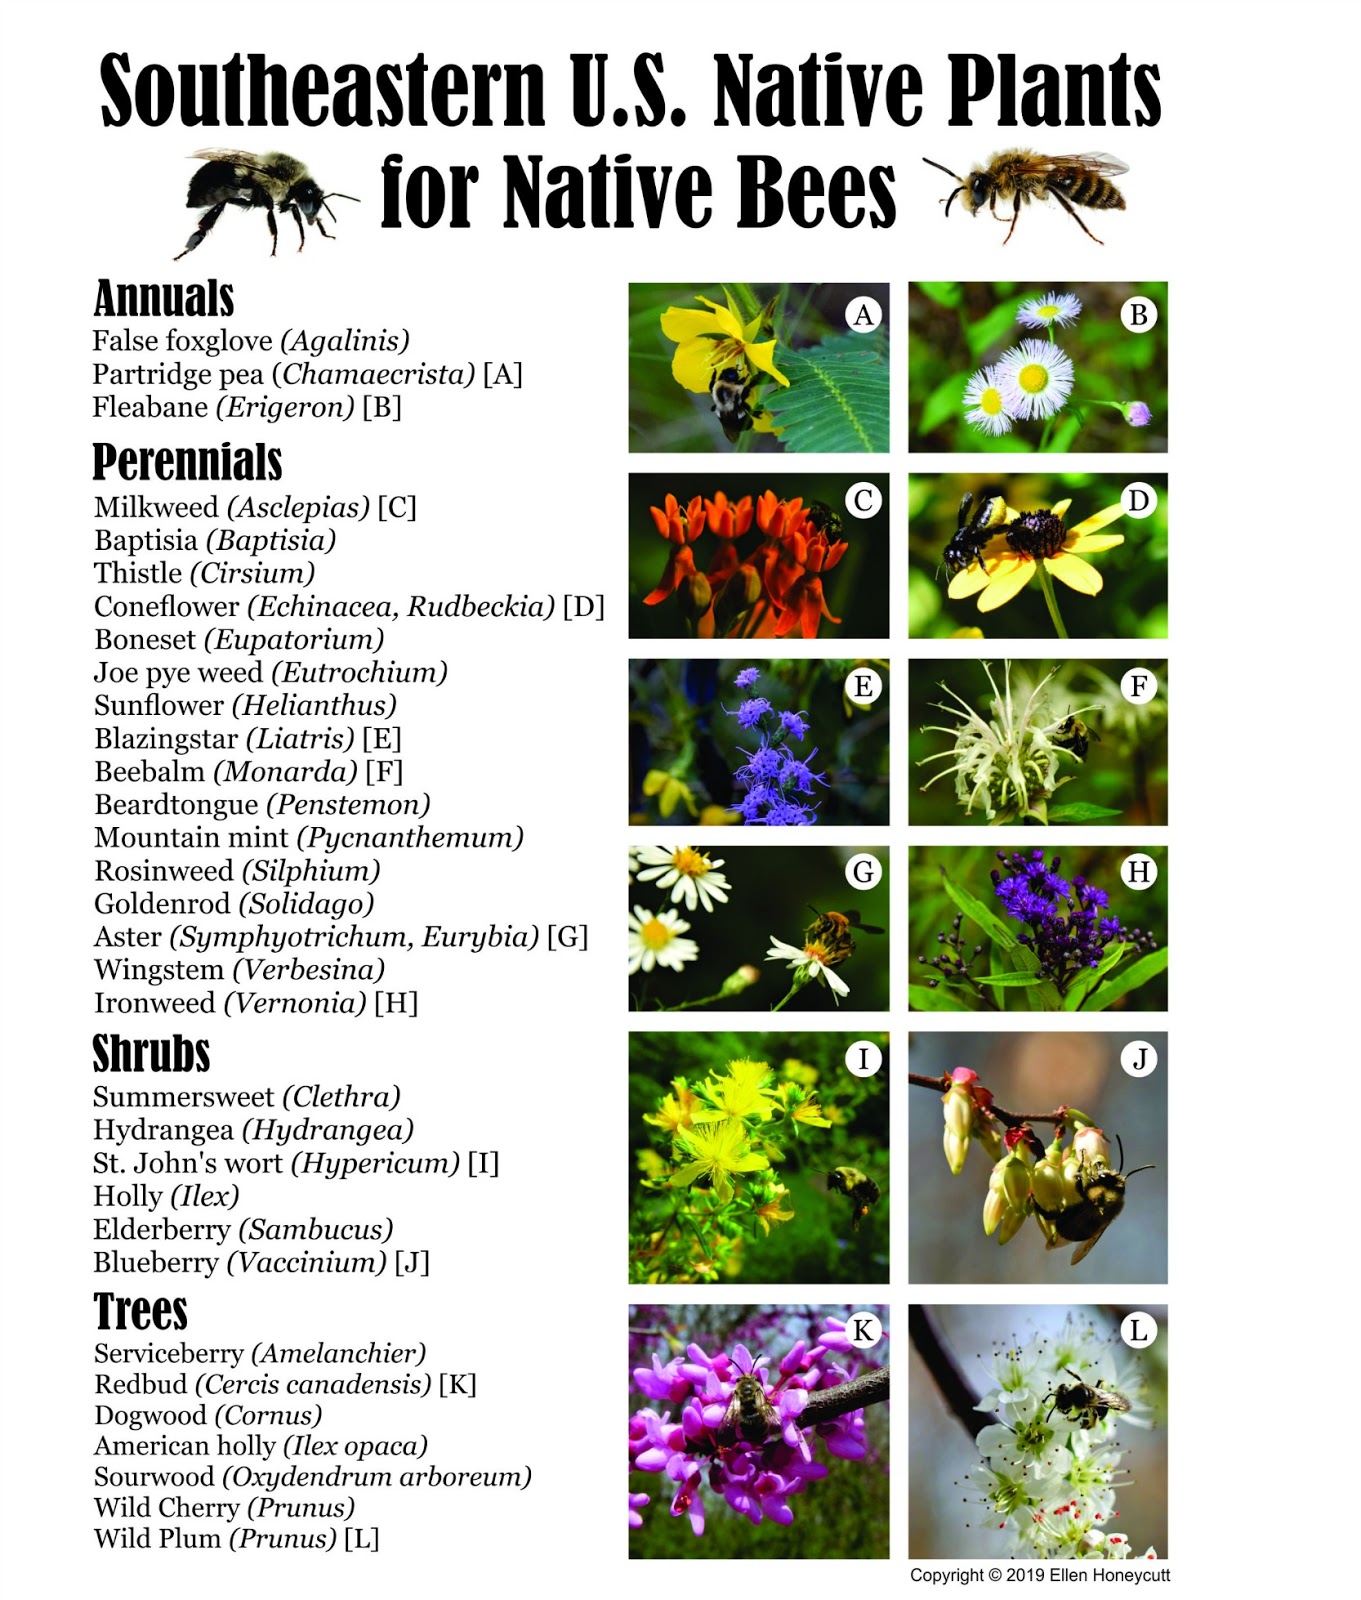 I. Introduction to Native Plants for Bees